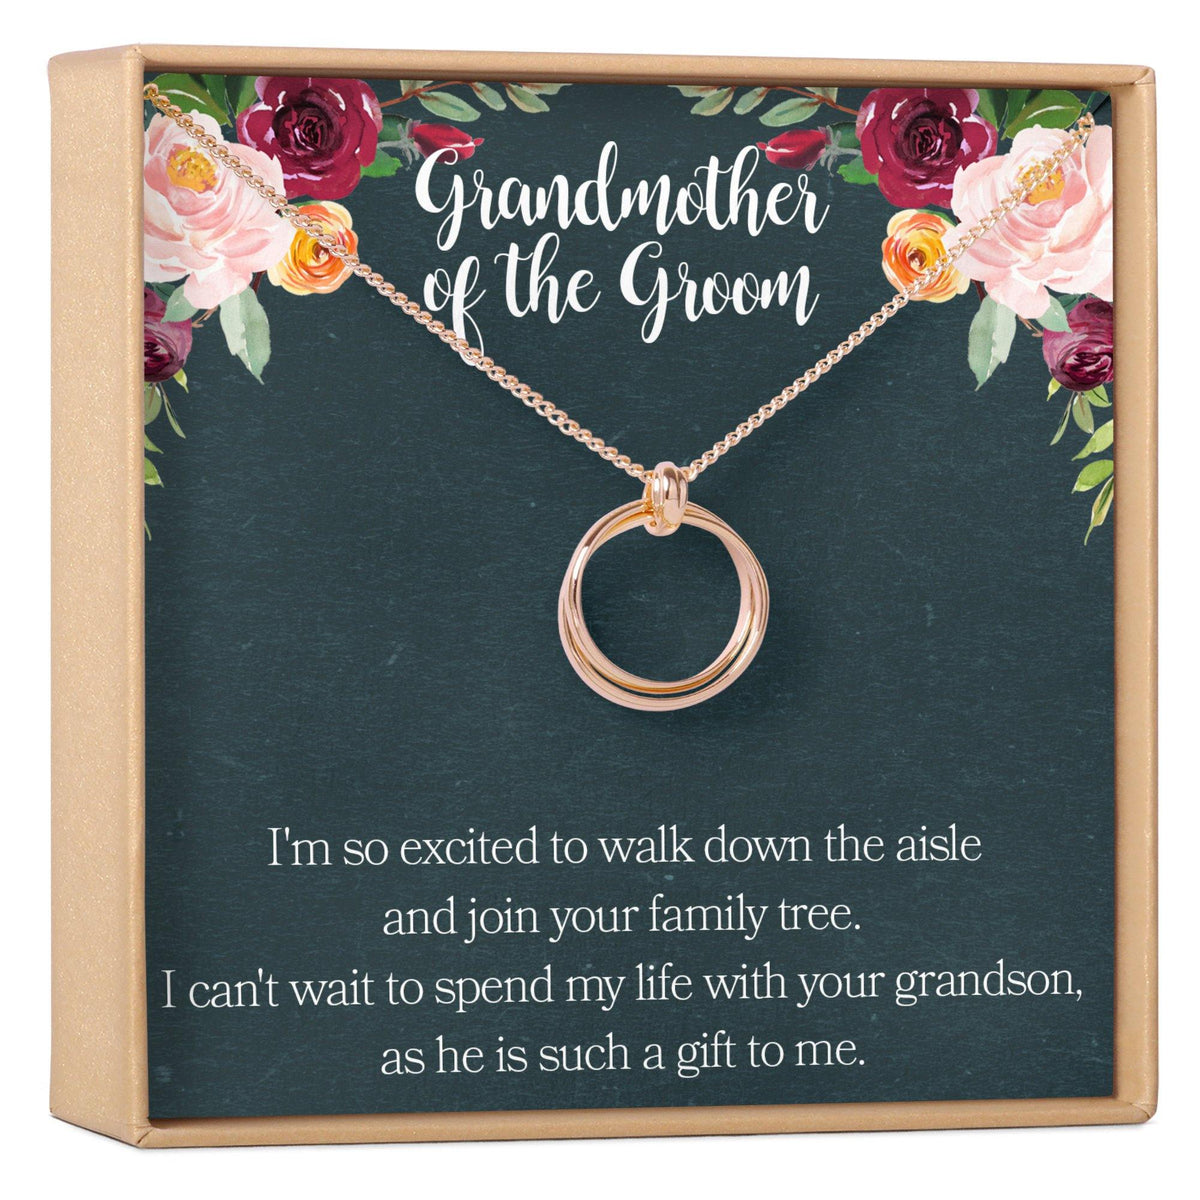 Grandmother of the Groom Necklace - Dear Ava, Jewelry / Necklaces / Pendants